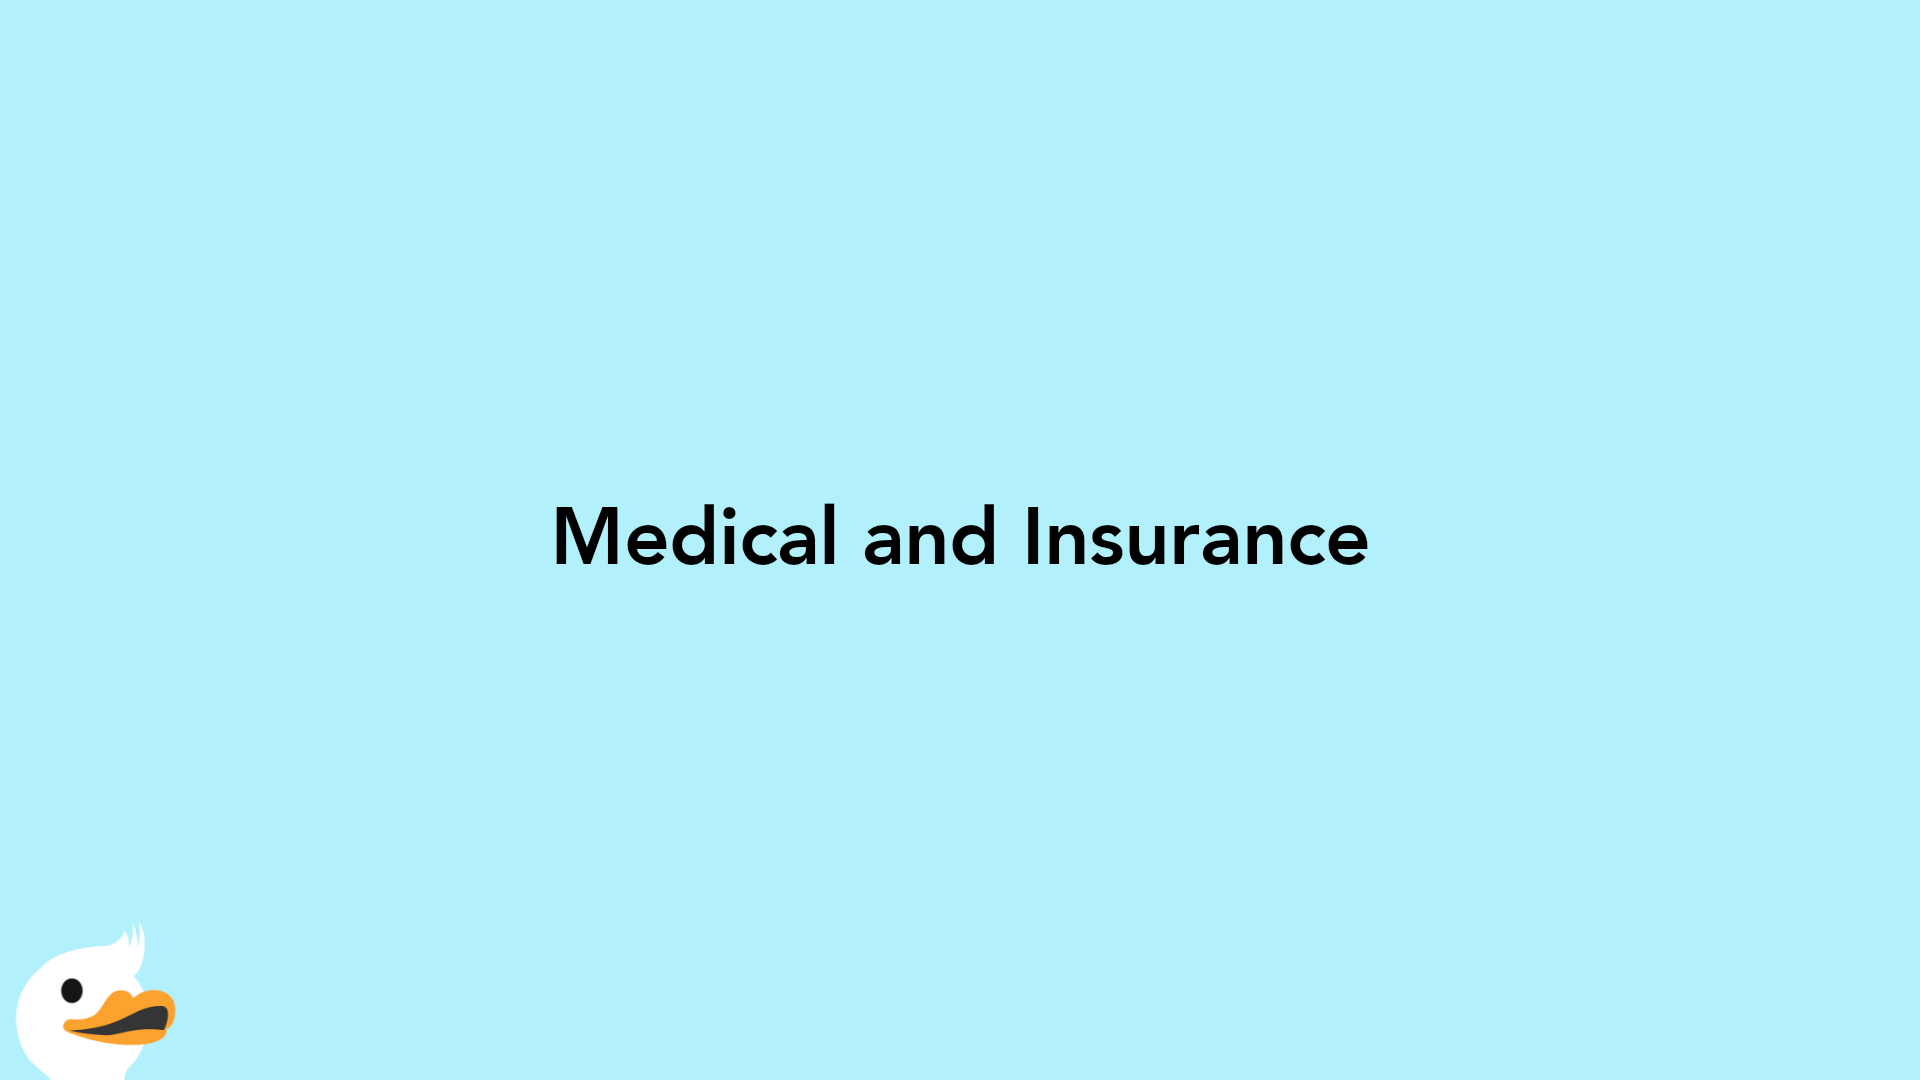 Medical and Insurance